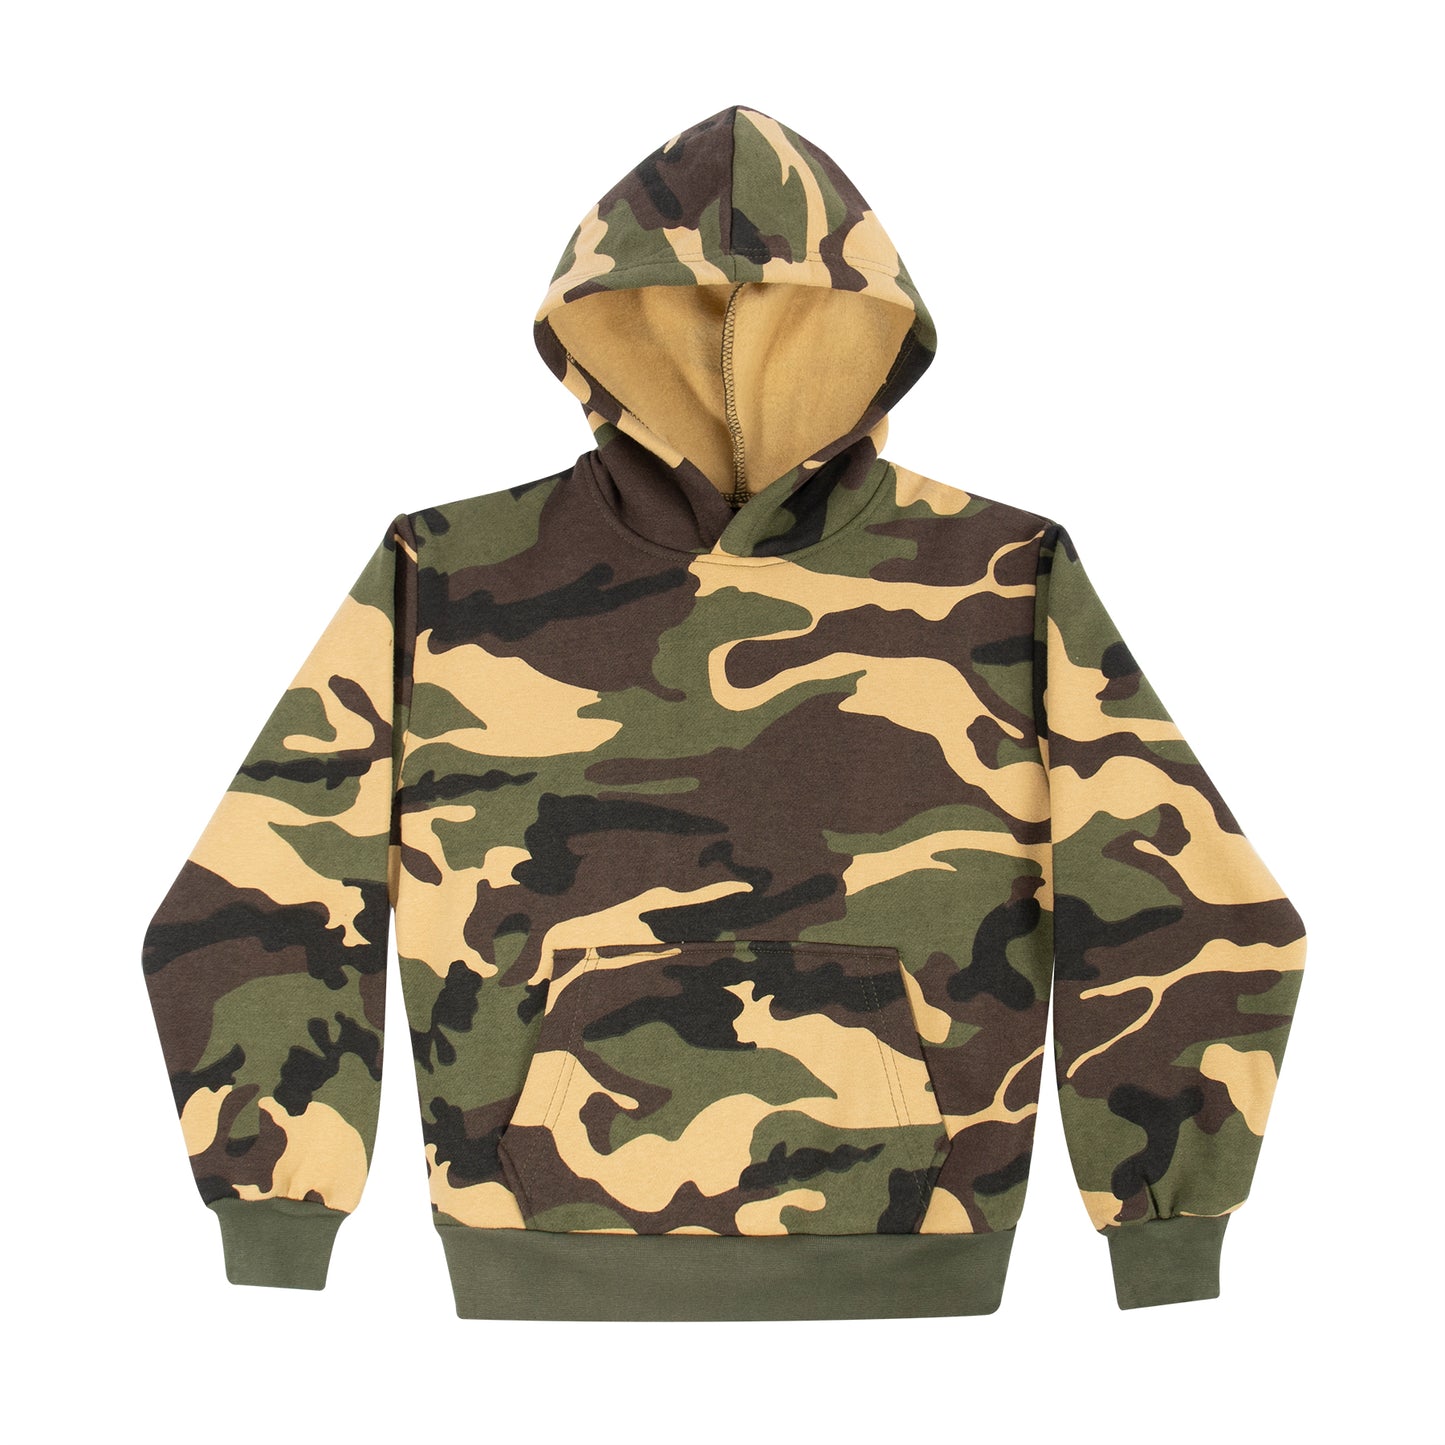 Kids Camo Hoodie - Army Marine Woodland Camouflage Pull Over Hooded Sw ...